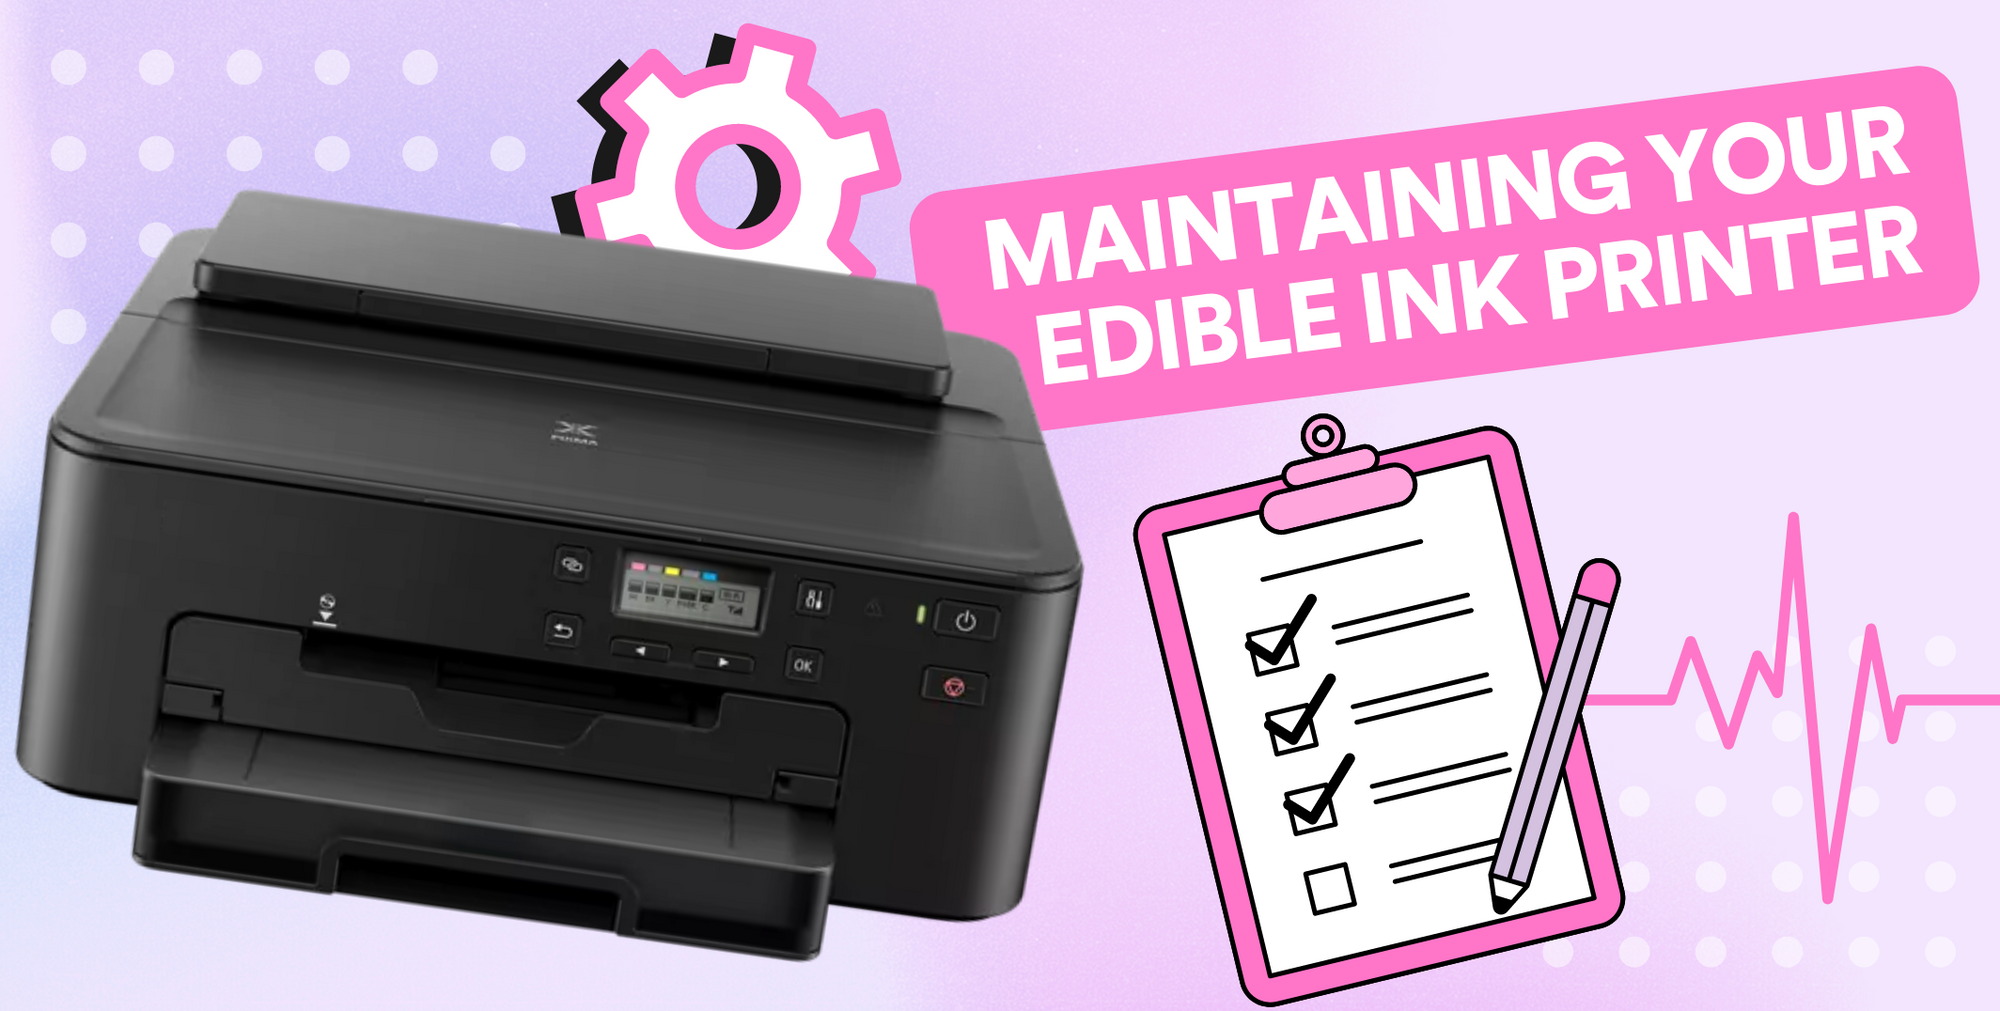 6 Tips to Maintain Your Edible Ink Printer